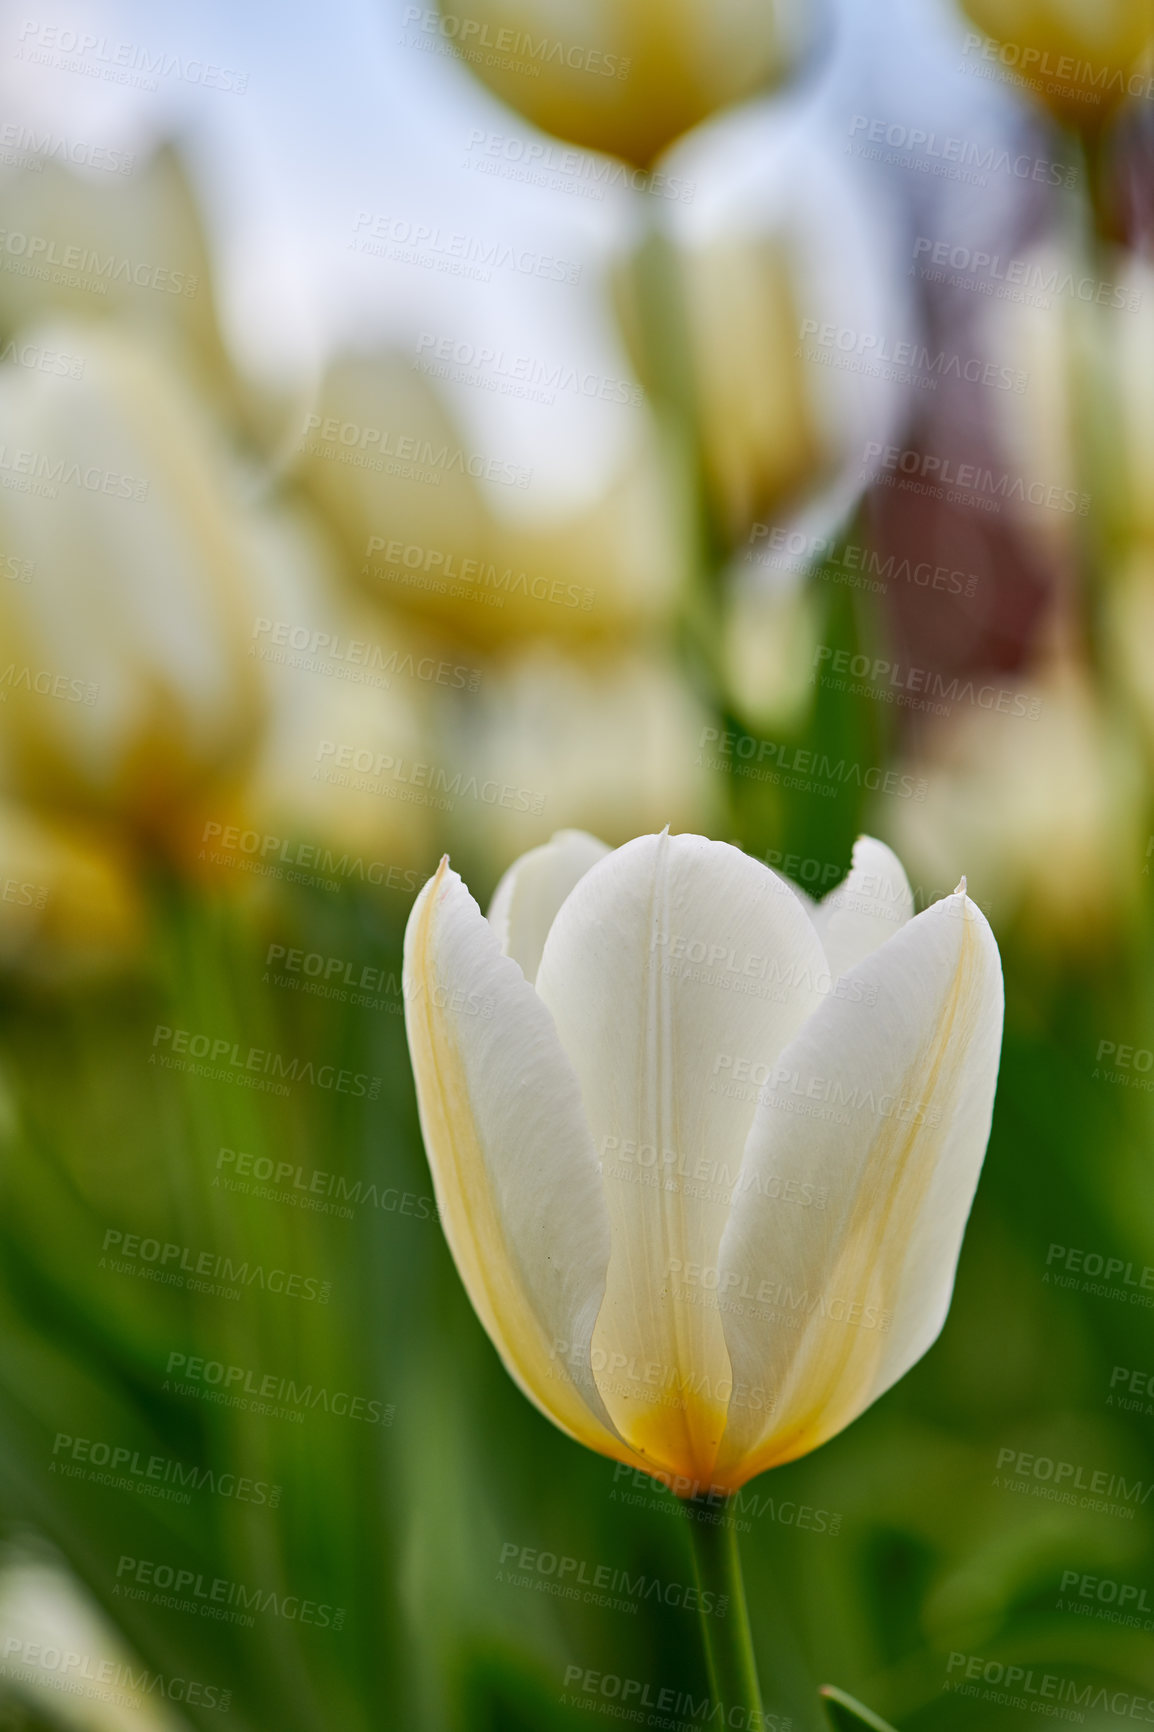 Buy stock photo Flowering plant beginning to open up and bloom in a backyard garden outside. Flowers flourishing and brightening a field. Beautiful white tulips growing against a nature background in summer